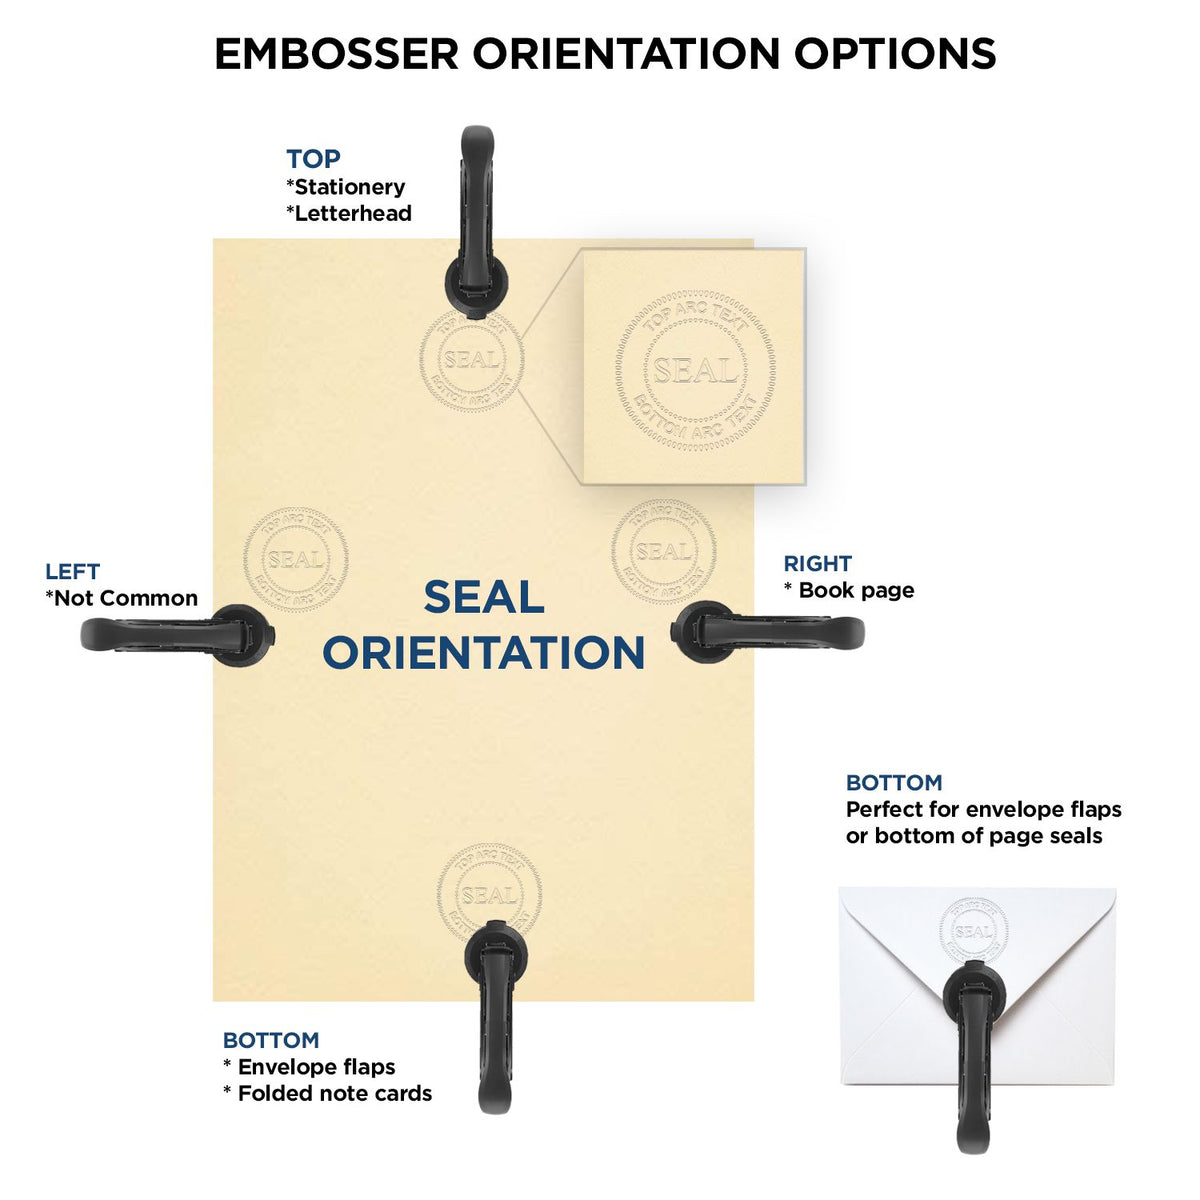 An infographic for the Nebraska Desk Architect Embossing Seal showing embosser orientation, this is showing examples of a top, bottom, right and left insert.